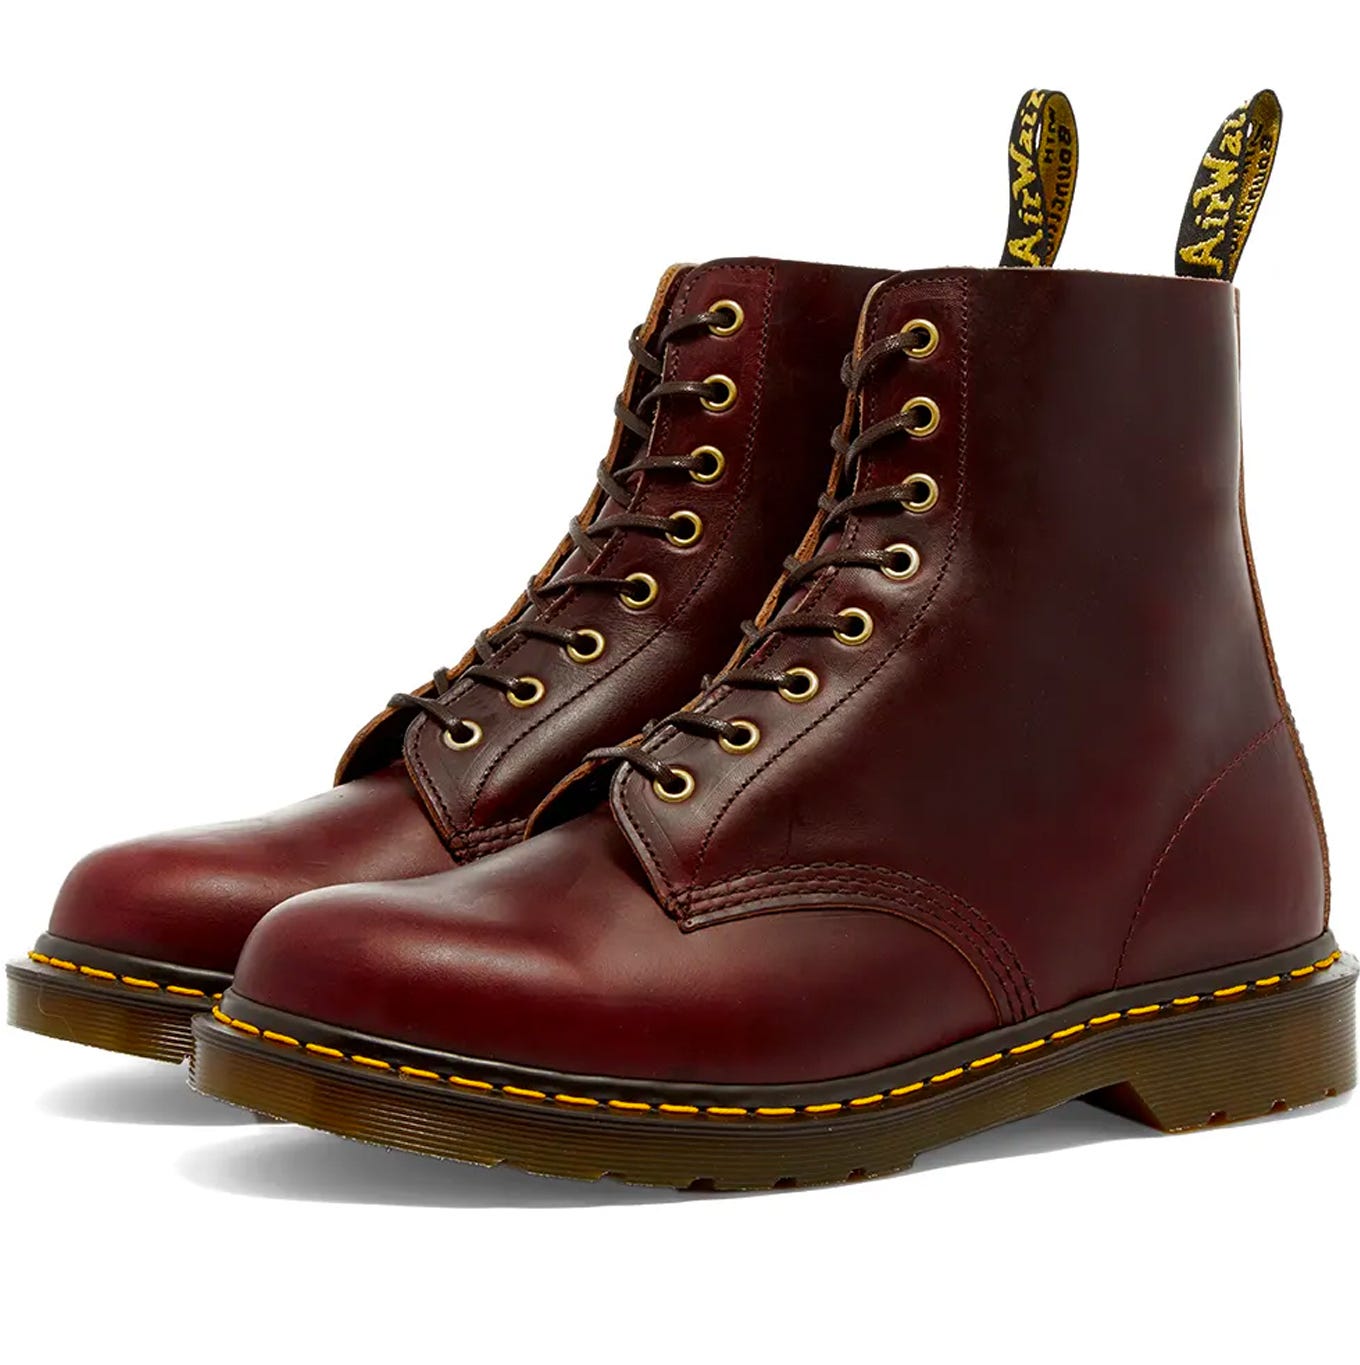 Dr. Martens Made in England review